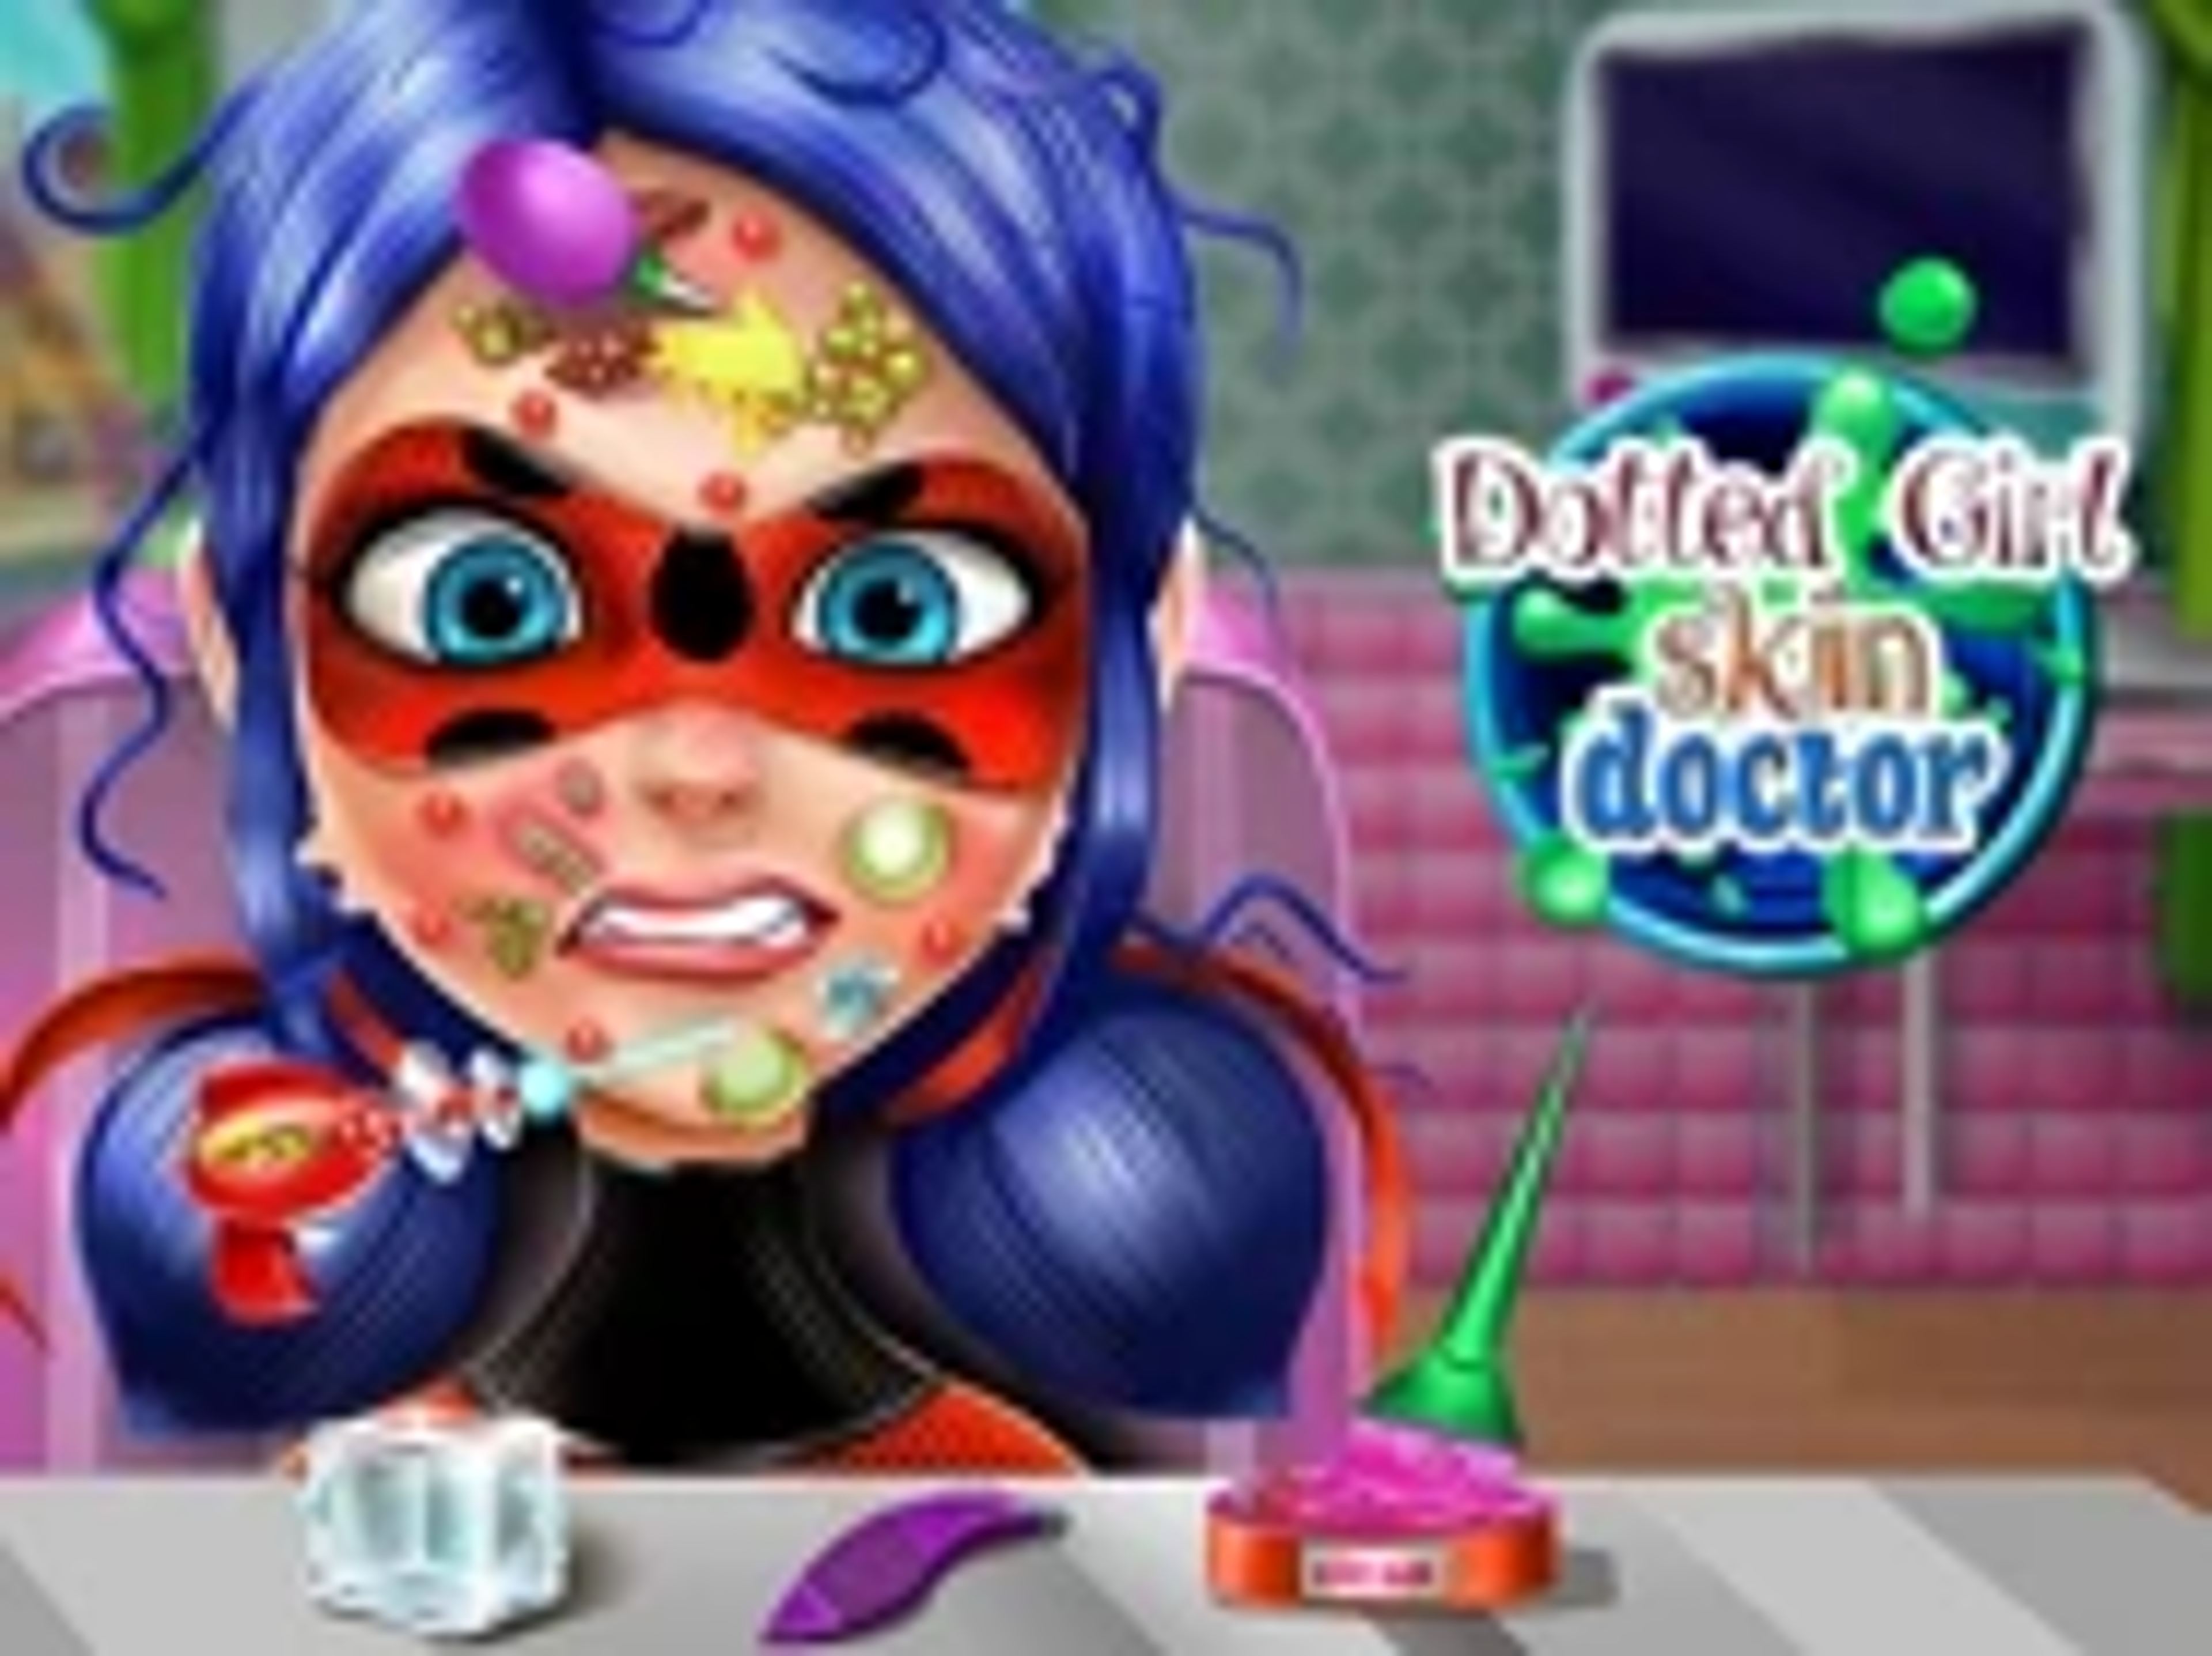 Dotted Girl Skin Doctor